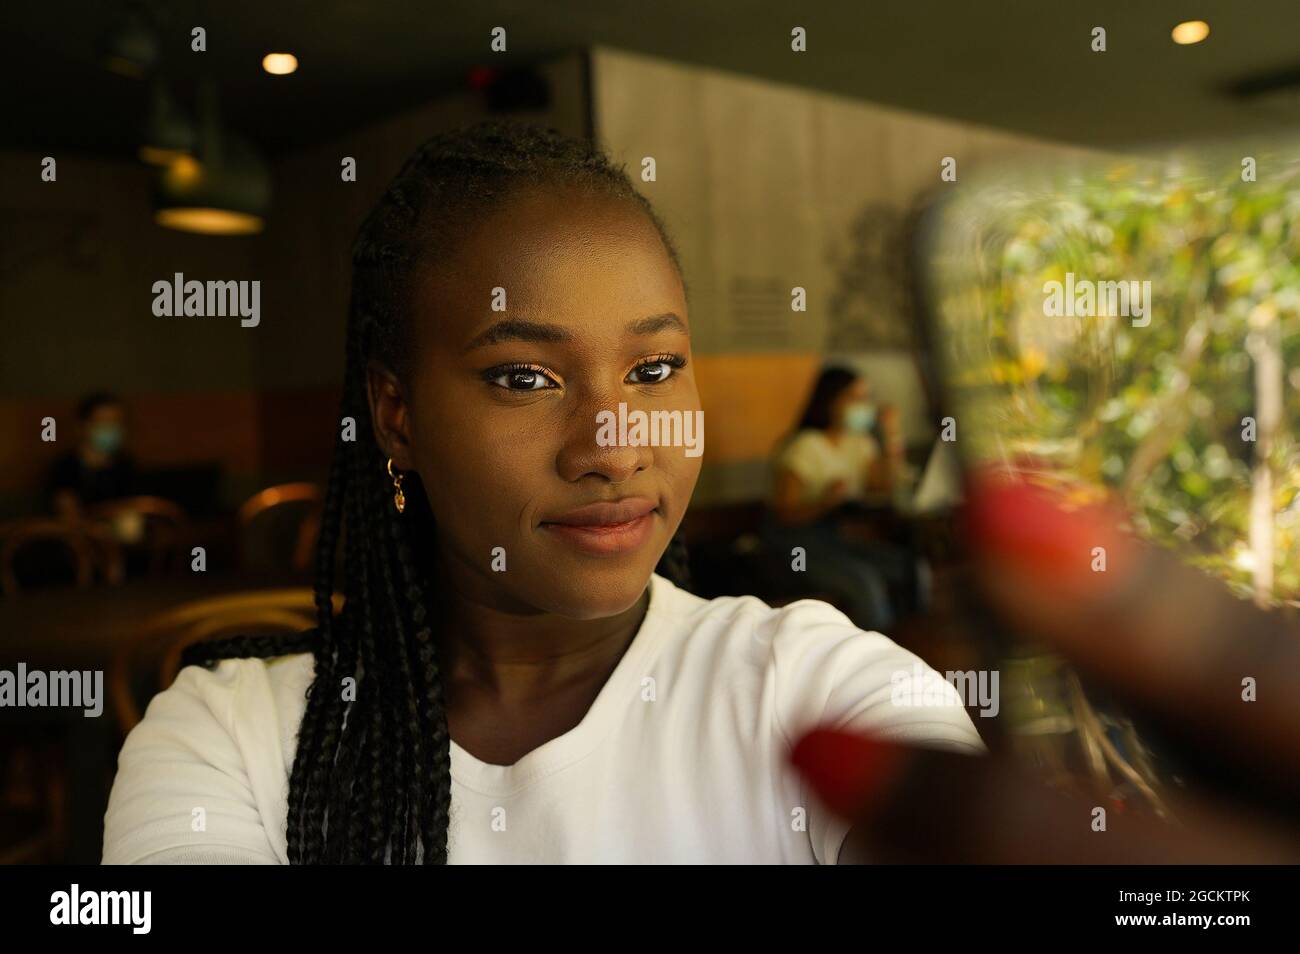 Charming African American female with braids taking self shot in cafe ...